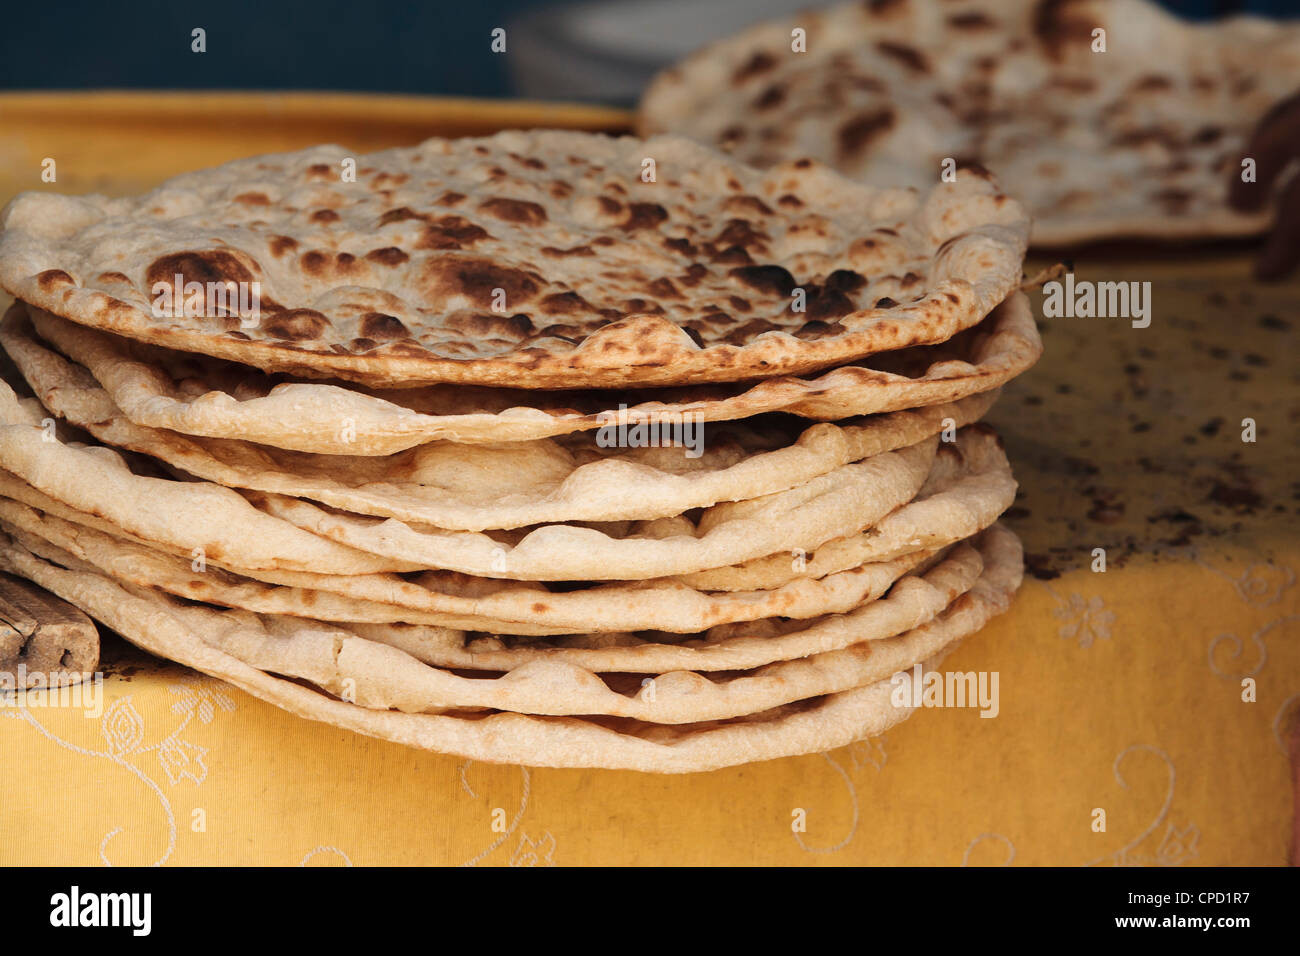 Middle Eastern Flat Bread Recipes
 Traditional flat bread Sulaymaniyah Iraq Middle East